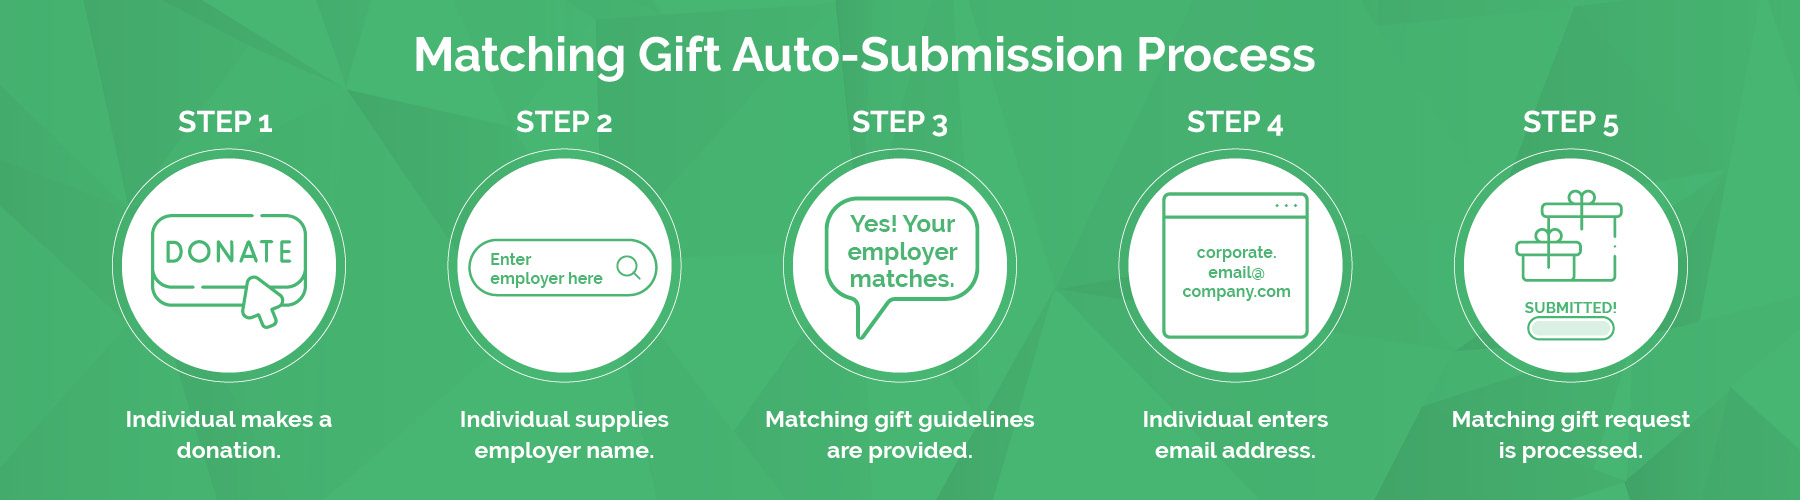 Here's what matching gift auto-submission looks like for top matching gift companies.